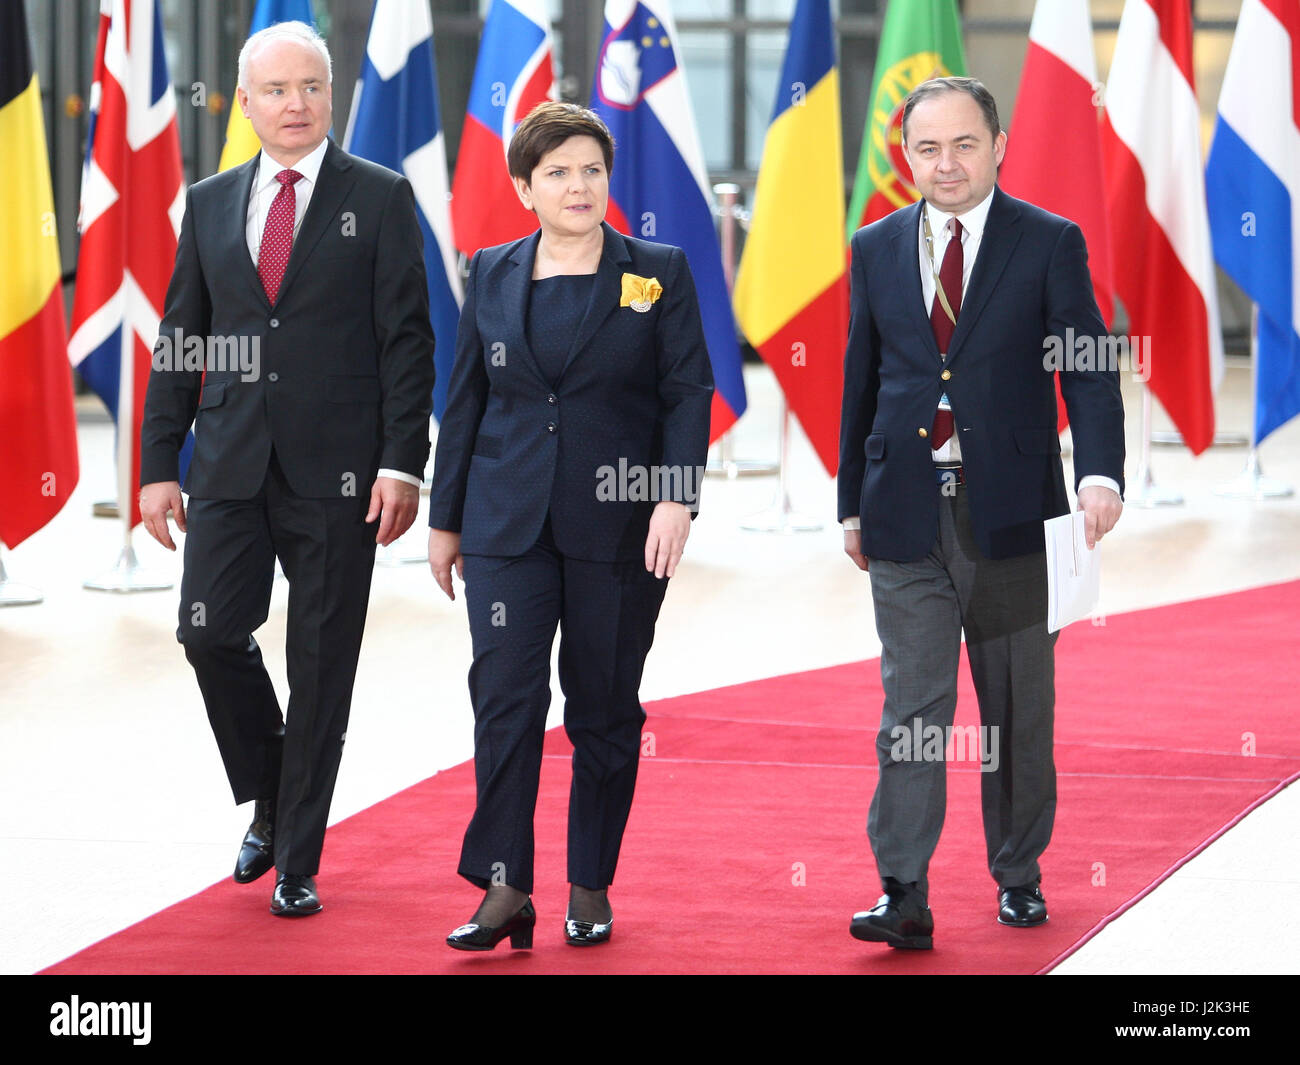 Brussels, Belgium. 29th Apr, 2017. Special Meeting European Council (ART.50) Brexit, entry of Poland Prime Minister Beata Szydto. Credit: Leo Cavallo/Alamy Live News Stock Photo